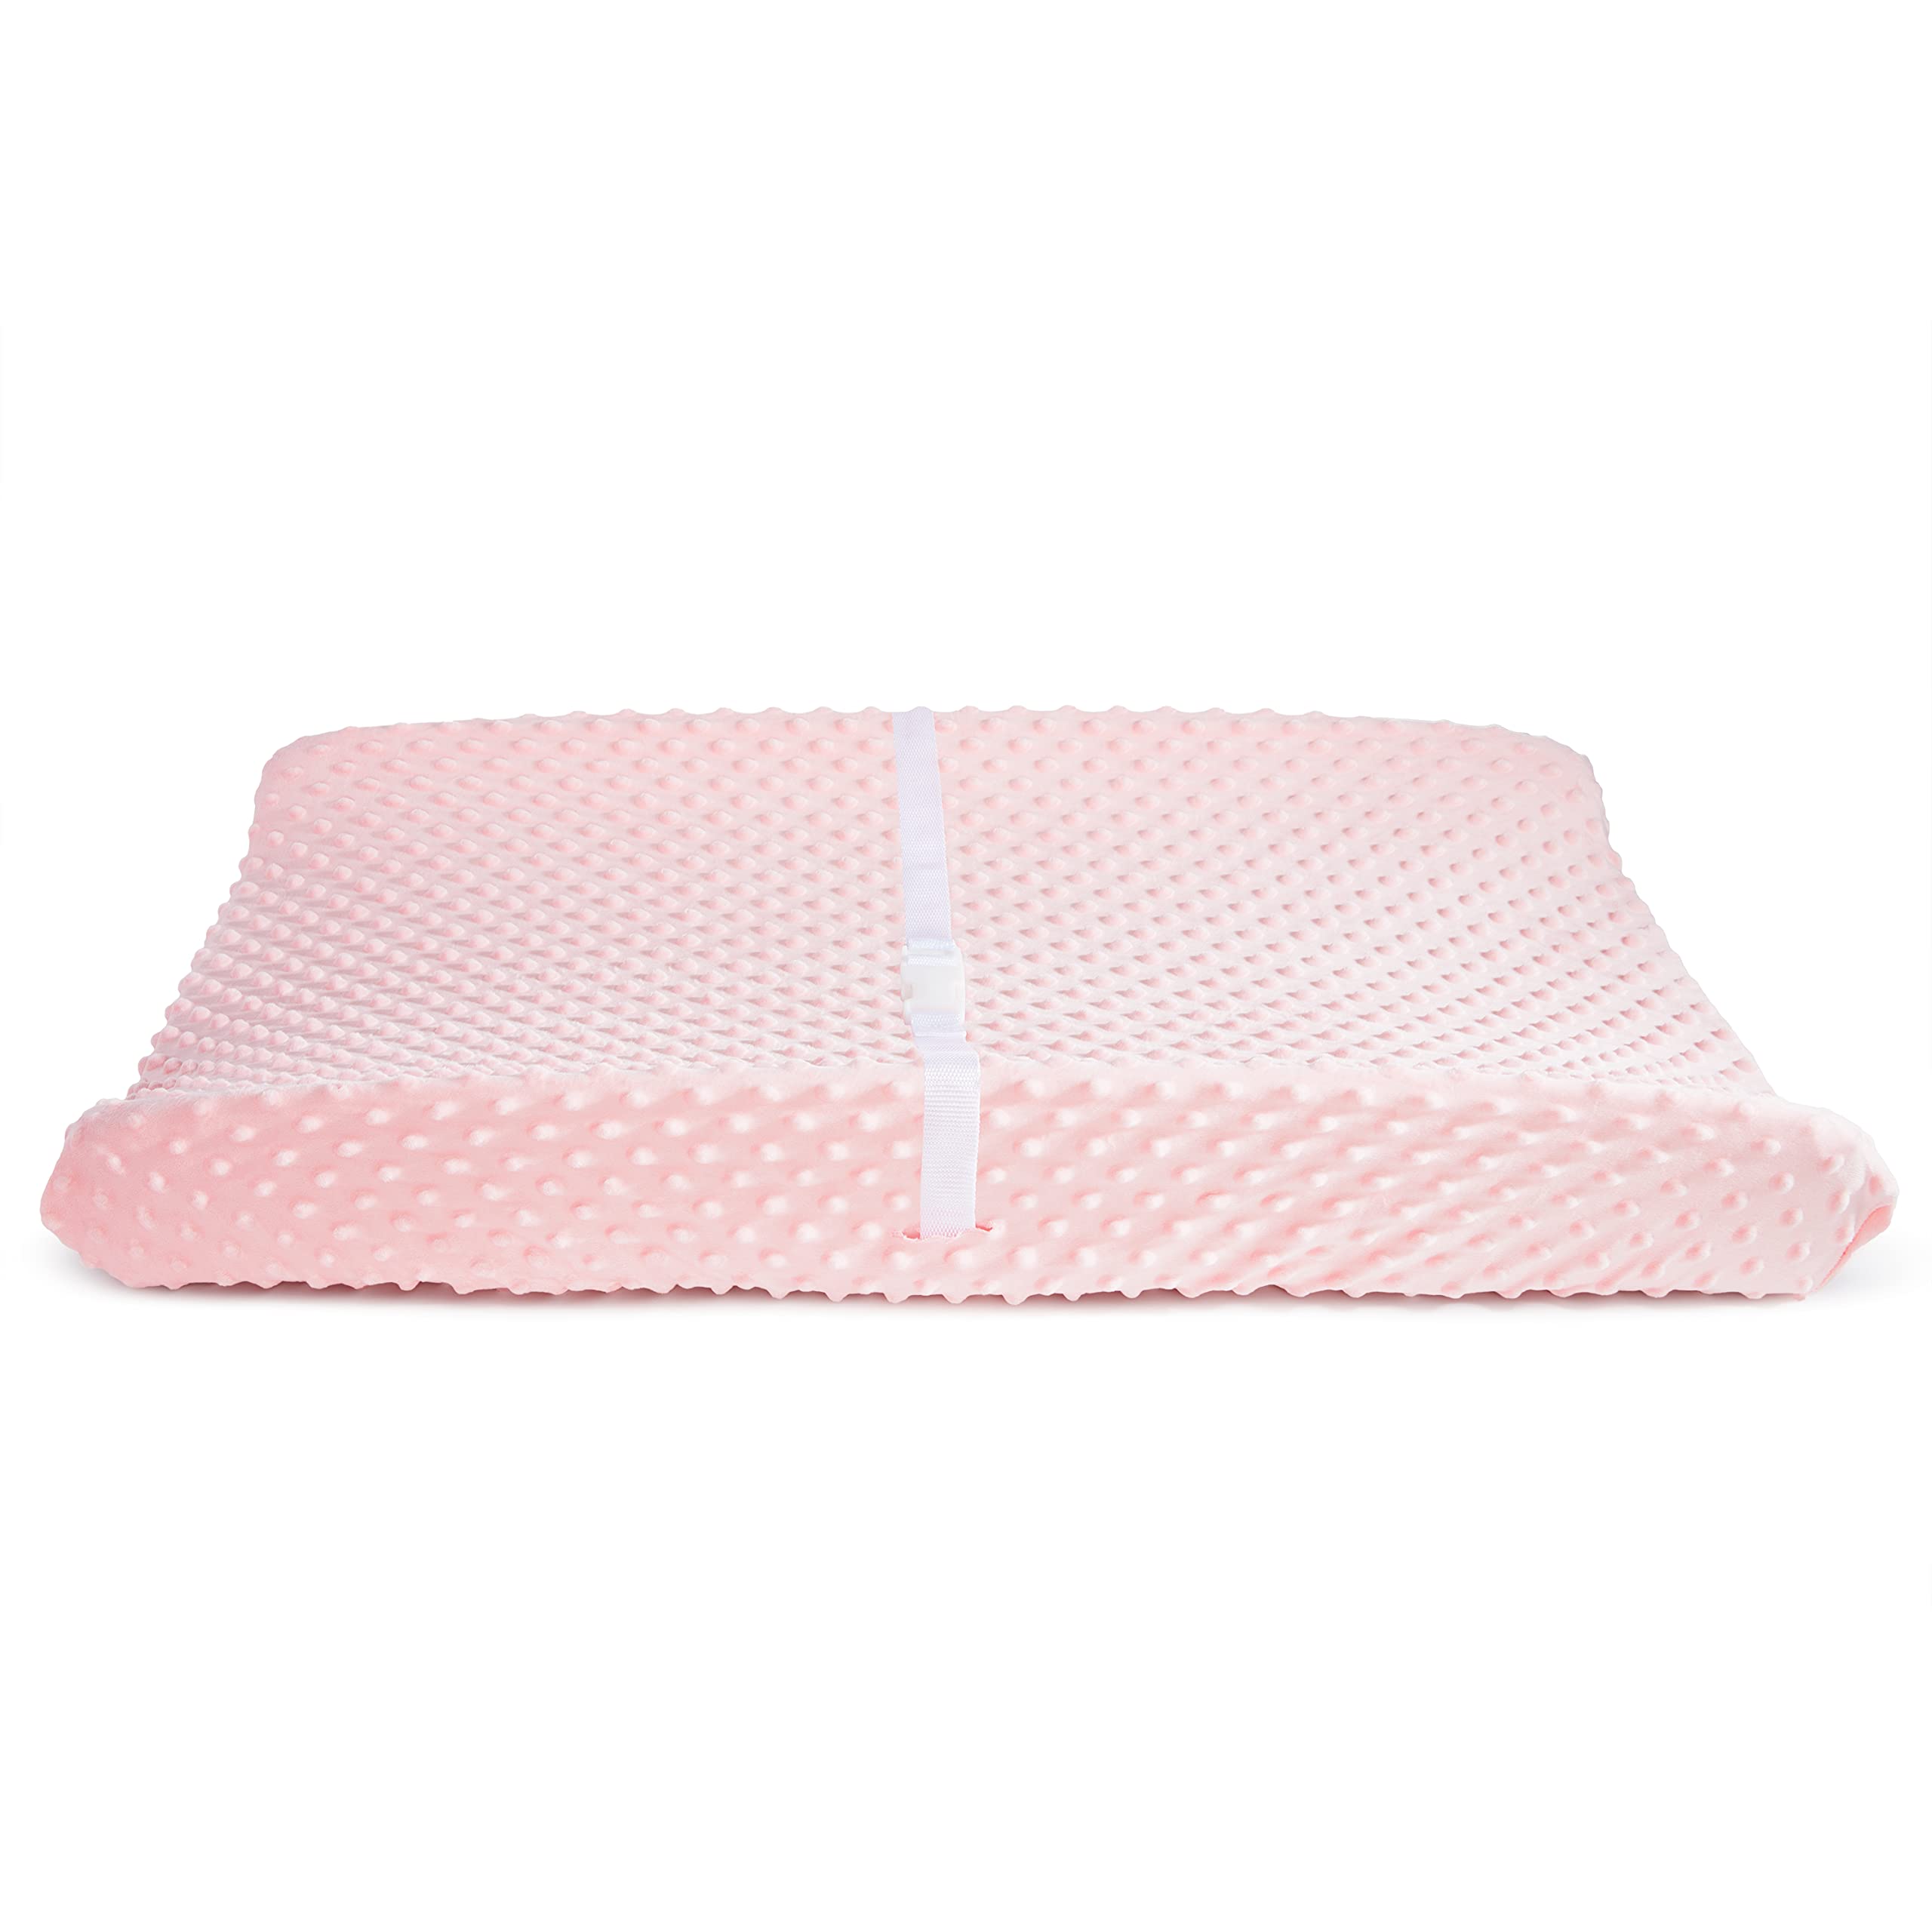 Munchkin® Diaper Changing Pad Covers, 2 Pack, Pink/White – Fits Standard Contoured Changing Pads